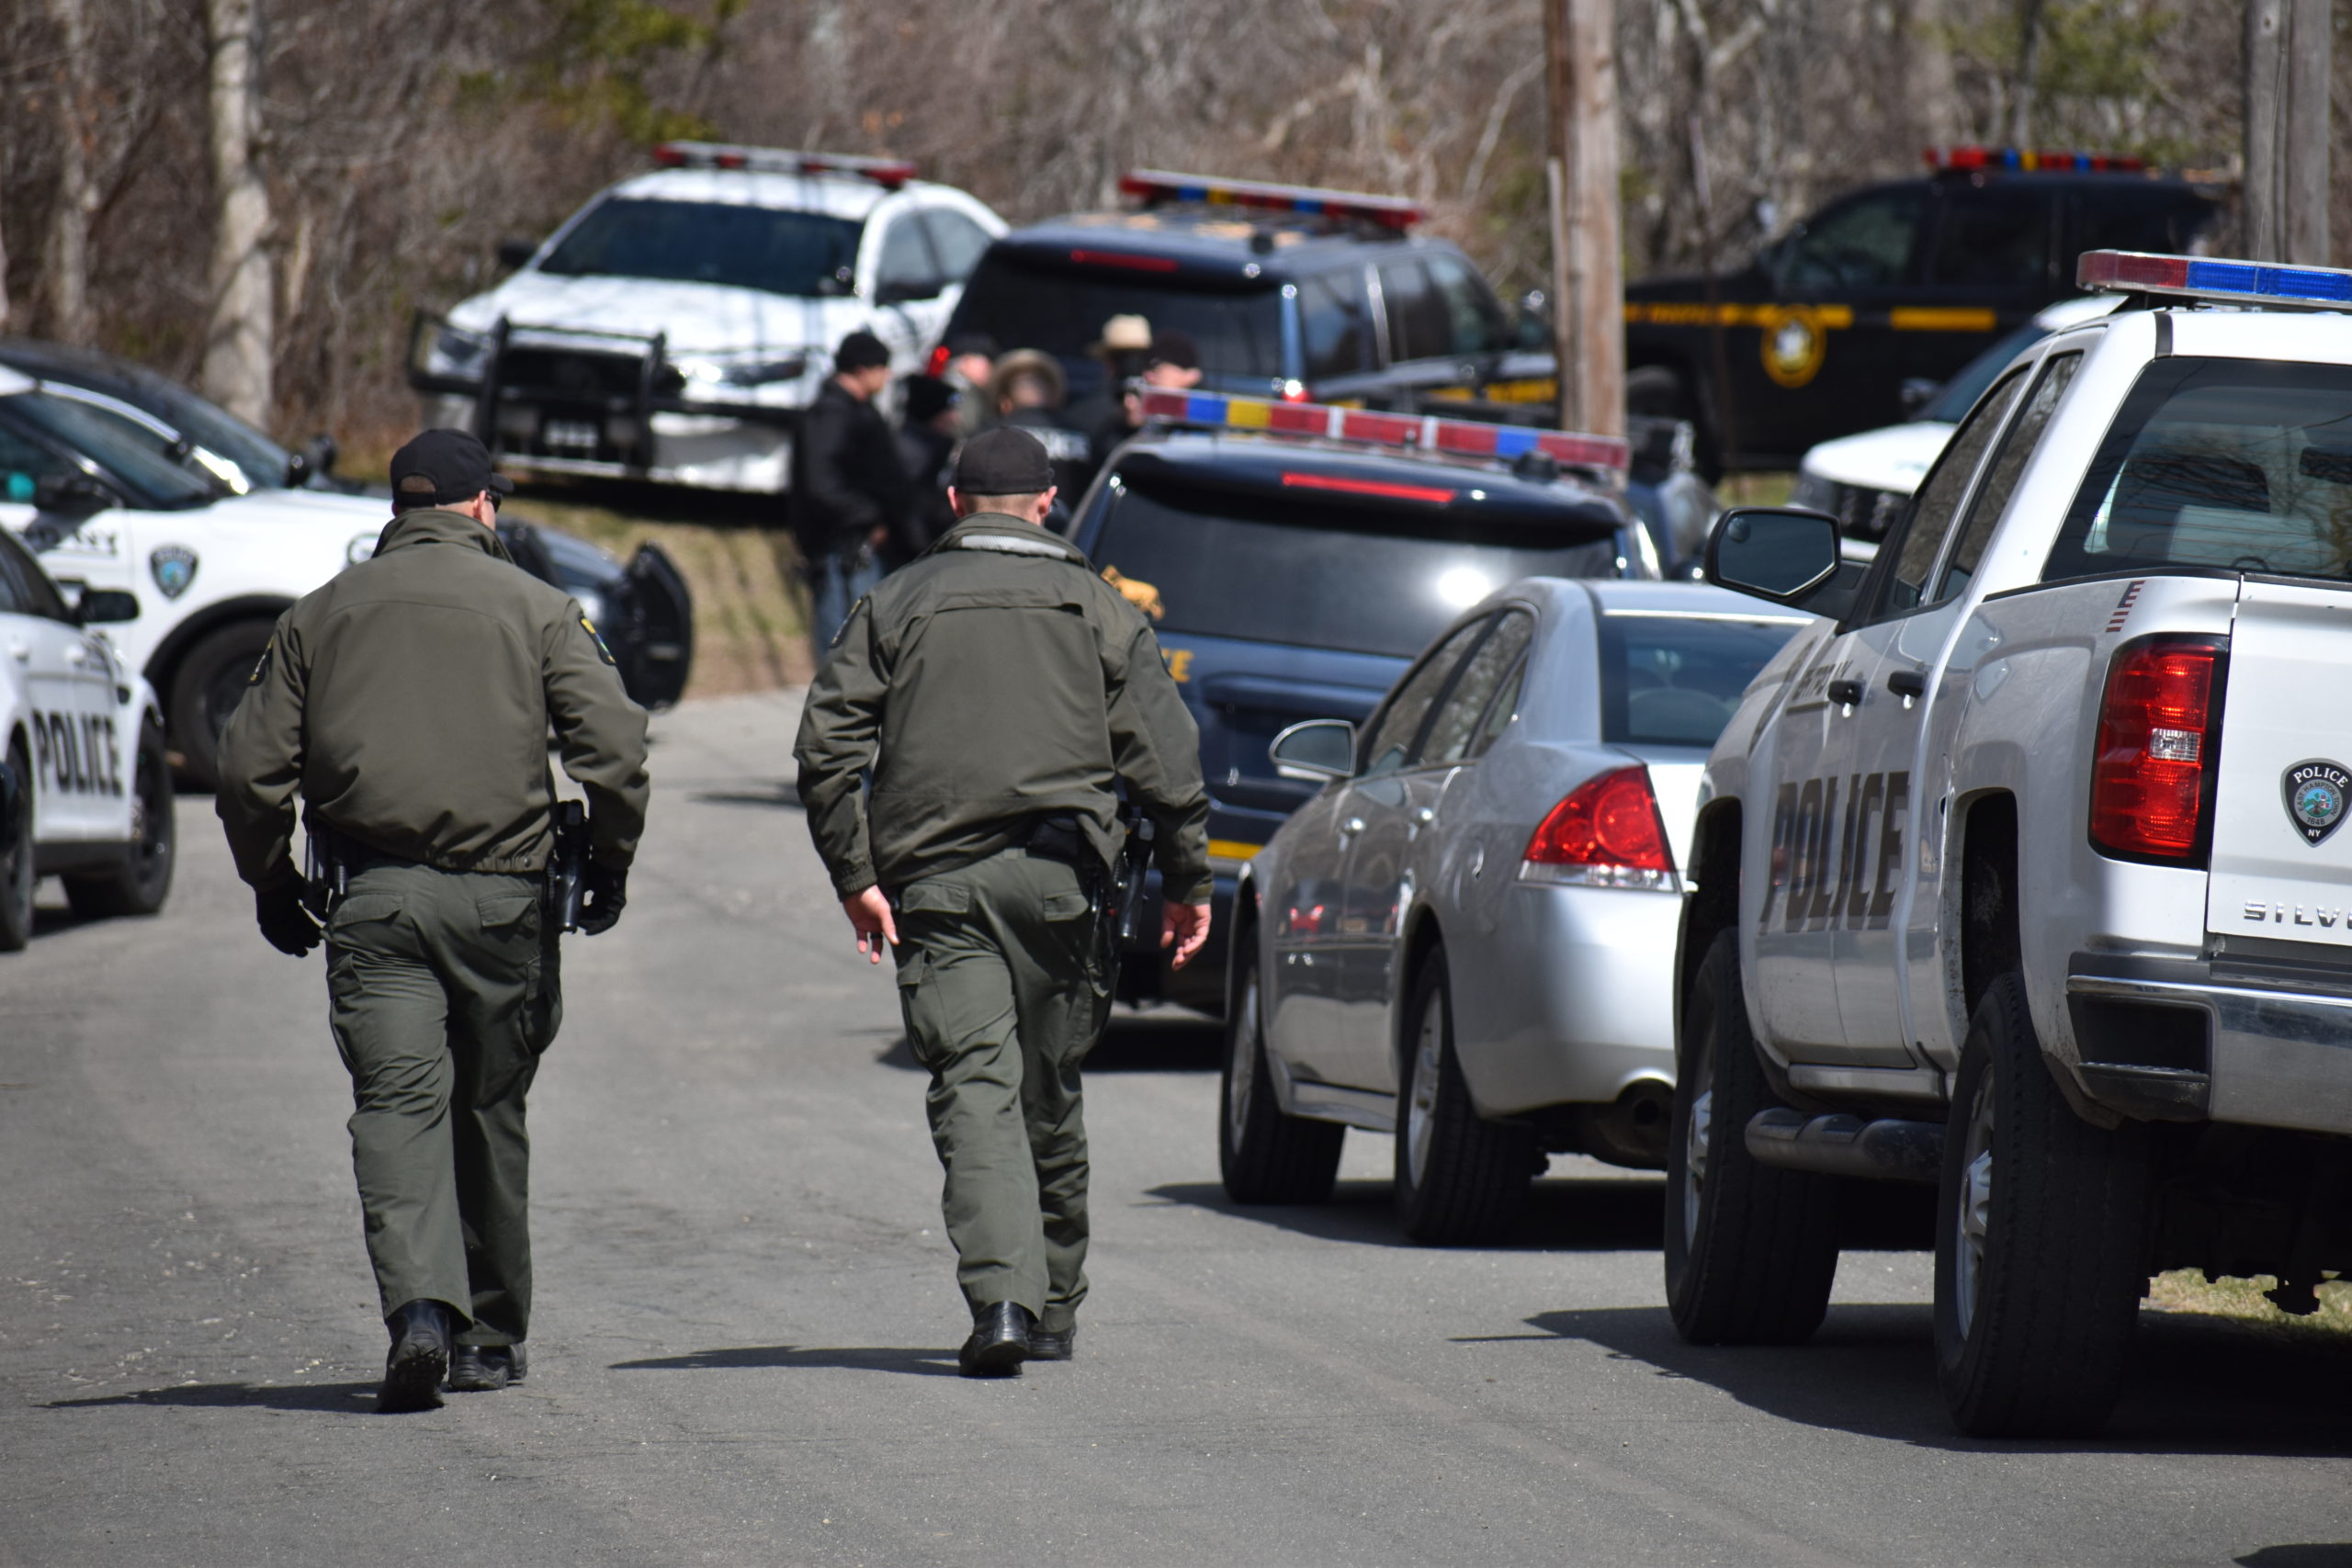 Two police officers return to the search scene near Camp Hero State Park.